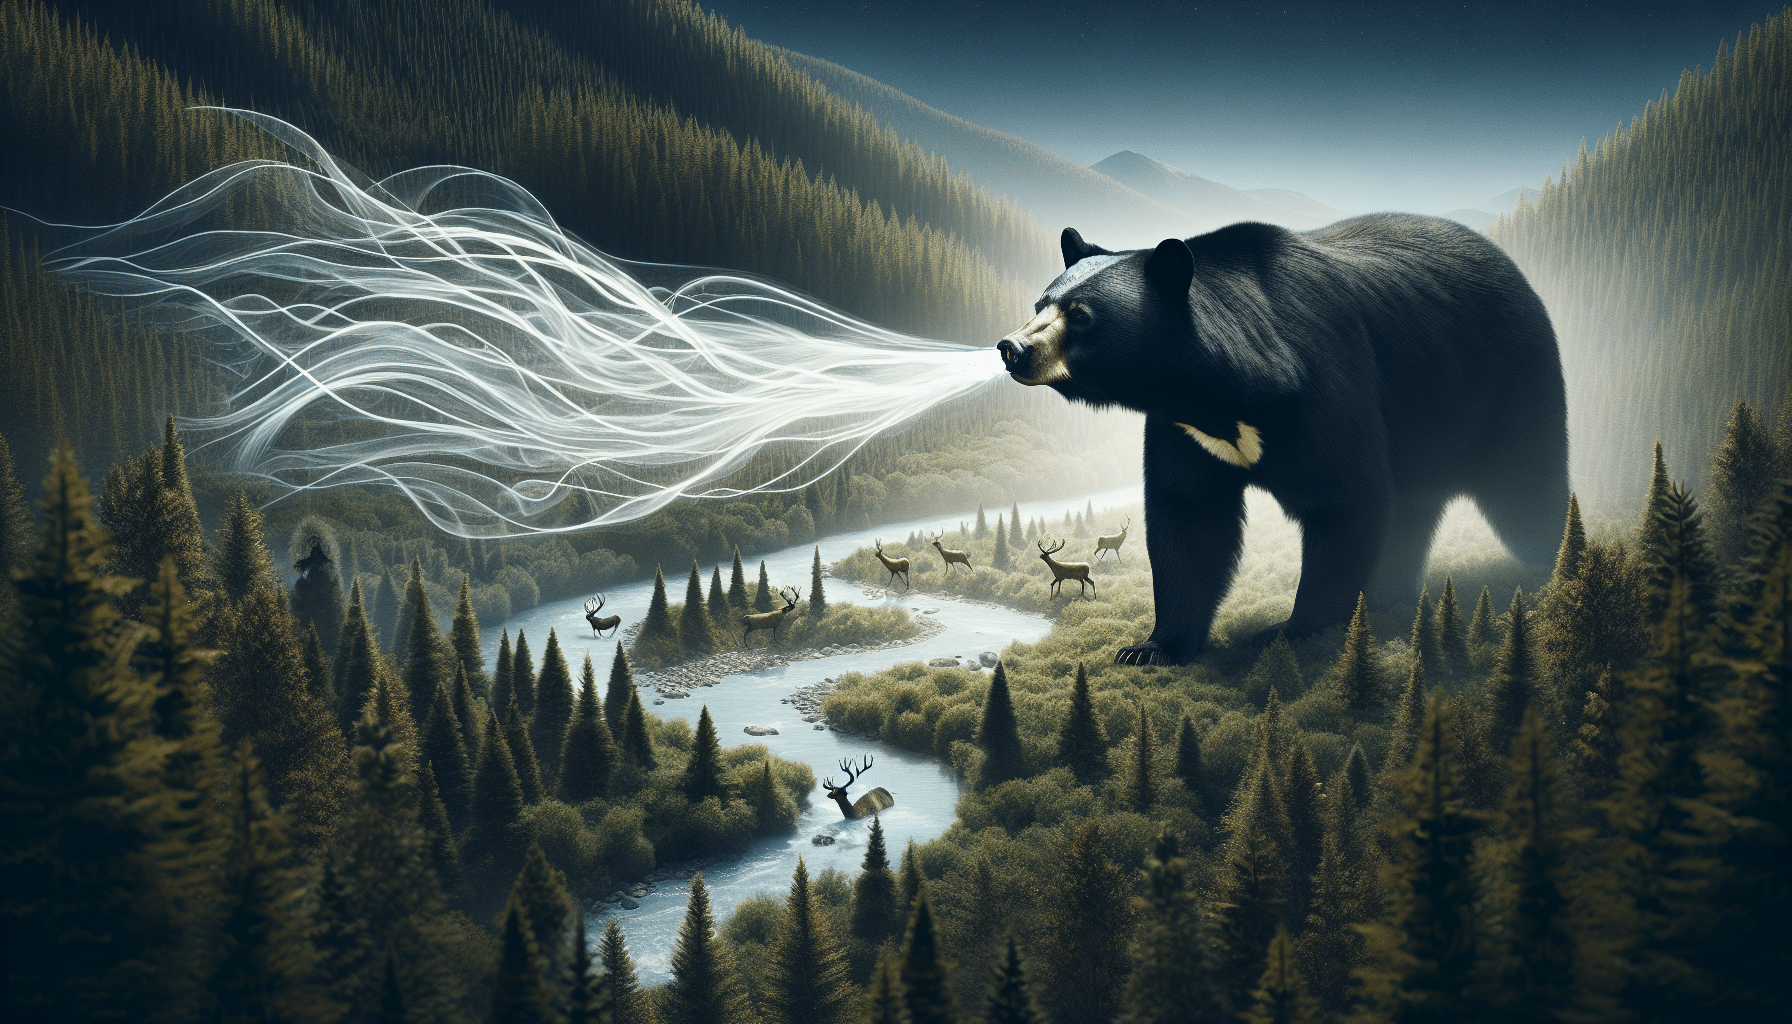 A visual representation of a black bear's incredible sense of smell. A black bear stands on a forested mountain, nose raised to the wind, inhaling deeply. The olfactory trail of an unseen food source leads away from the bear, represented by light, translucent trails. The smell travels over rivers, through dense pine forests, and past a family of deer among other wildlife. Show the bear's intense concentration in-close in the foreground, and provide the larger forest context in the background. Do not include any brand names, logos, text, or human figures.